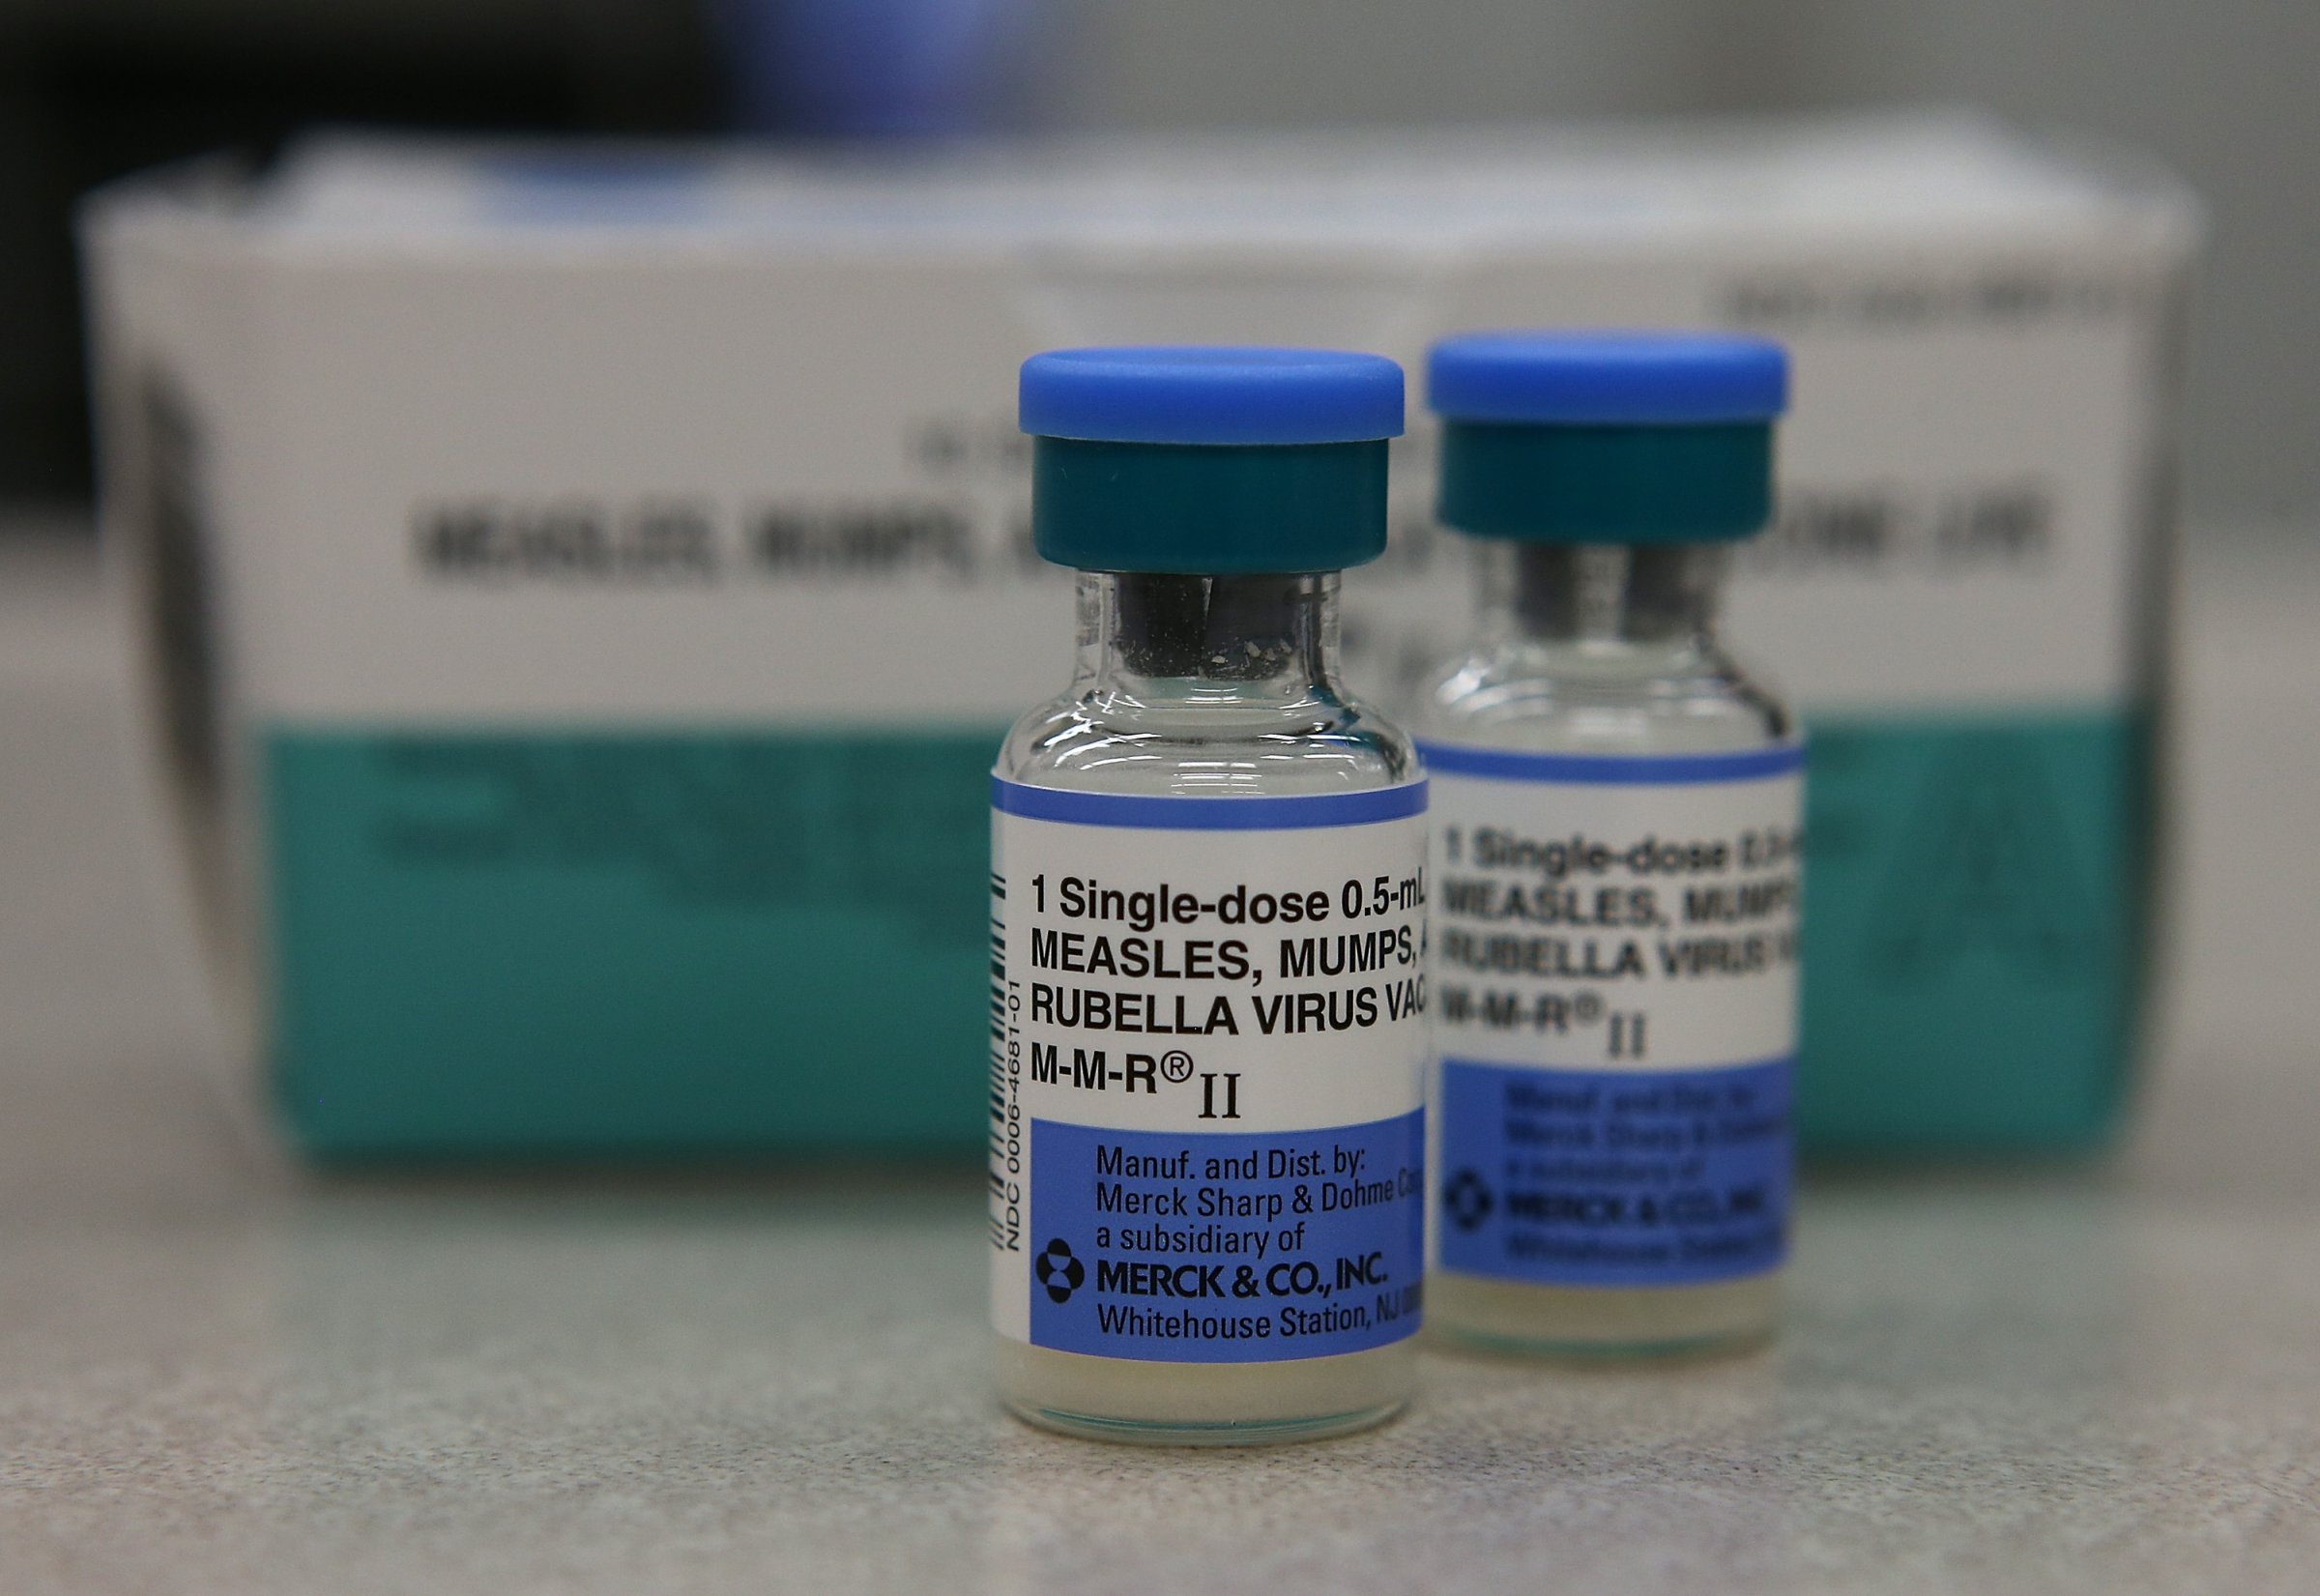 Large Outbreak Of Measles Reported In California